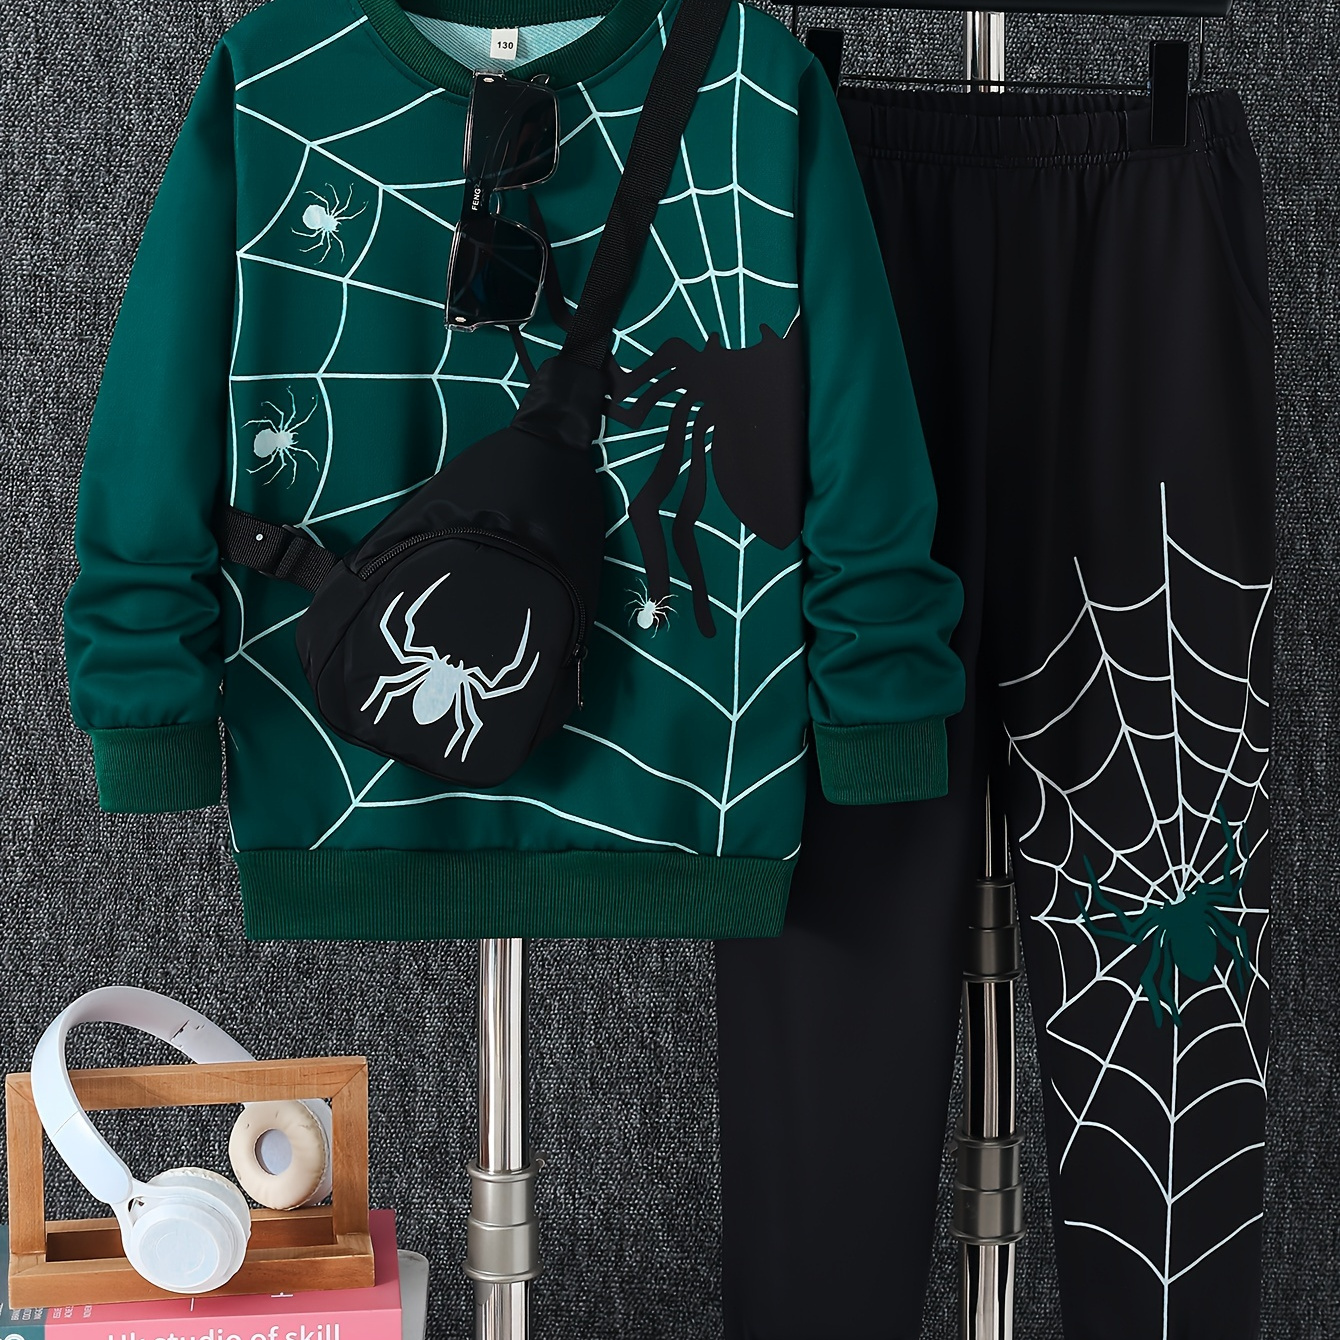 

Boy's 3-piece Casual Co Ord Set, Spider Web Print Versatile Long Sleeve Sweatshirt And Jogger Pants With Bag, Comfy Spring Fall Clothes